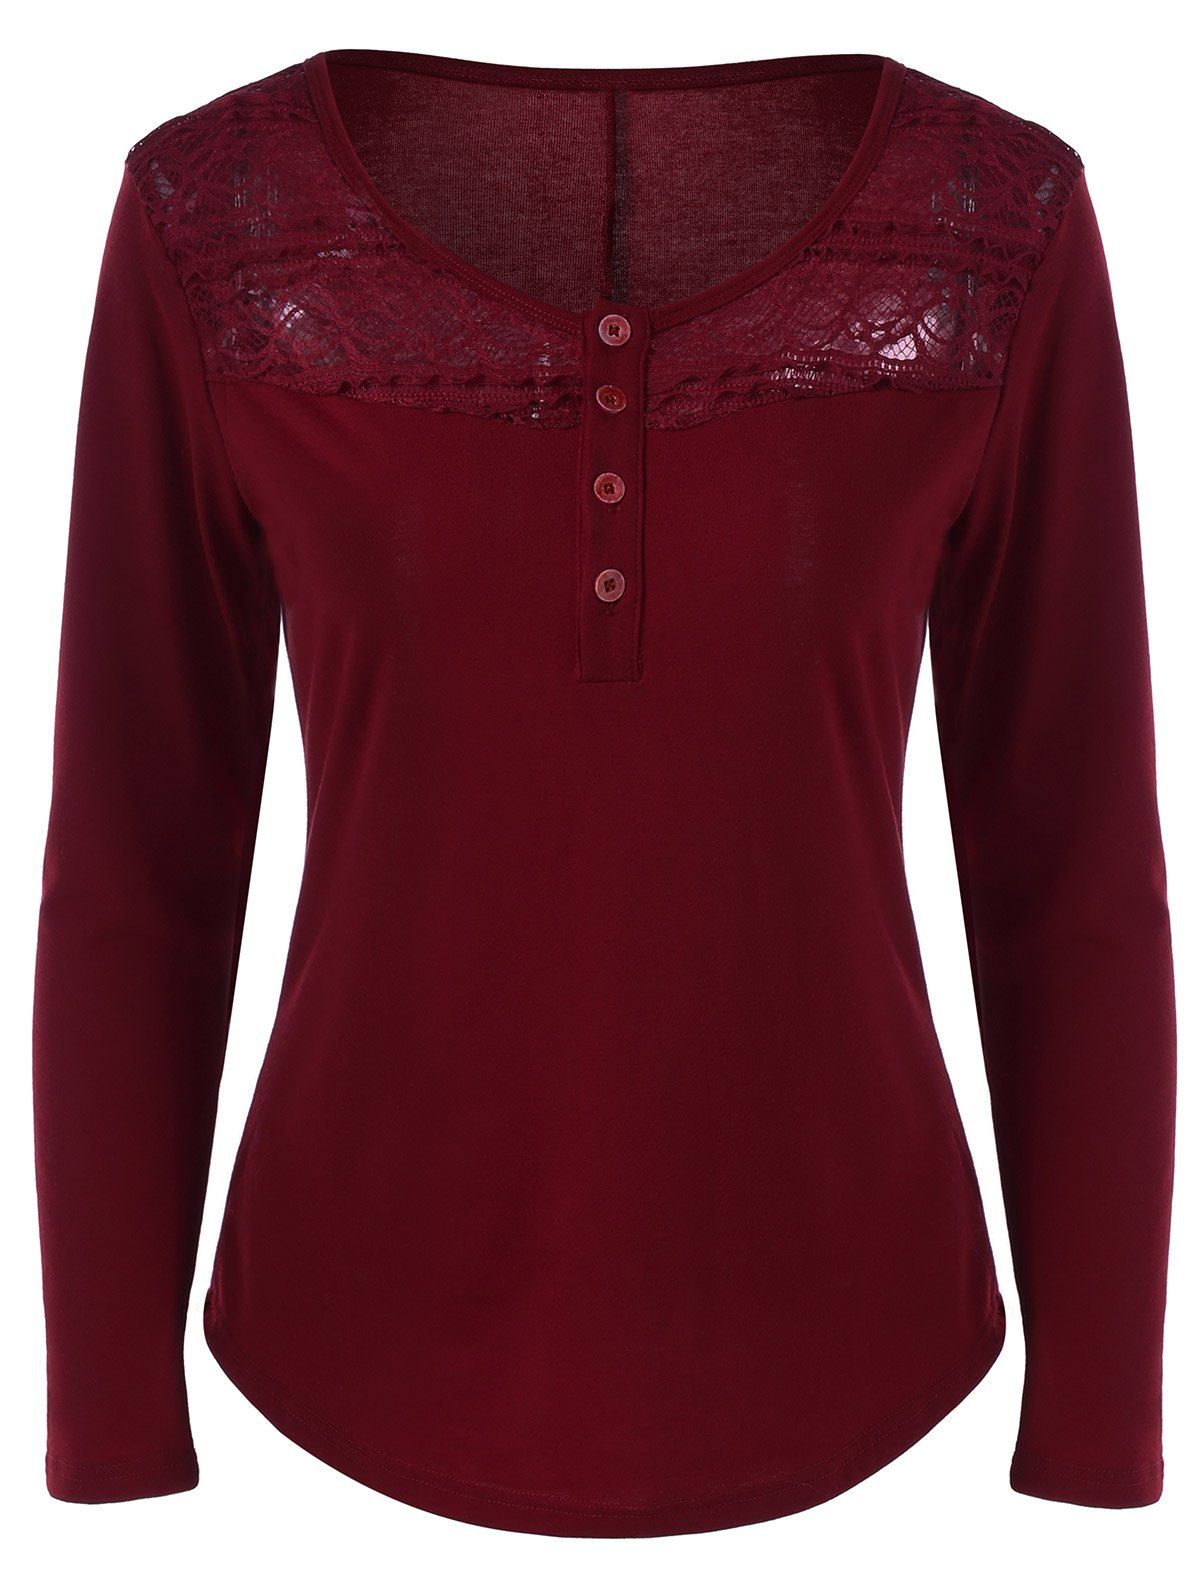 [41% OFF] 2021 Lace Panel Half Button T-Shirt In DEEP RED | DressLily